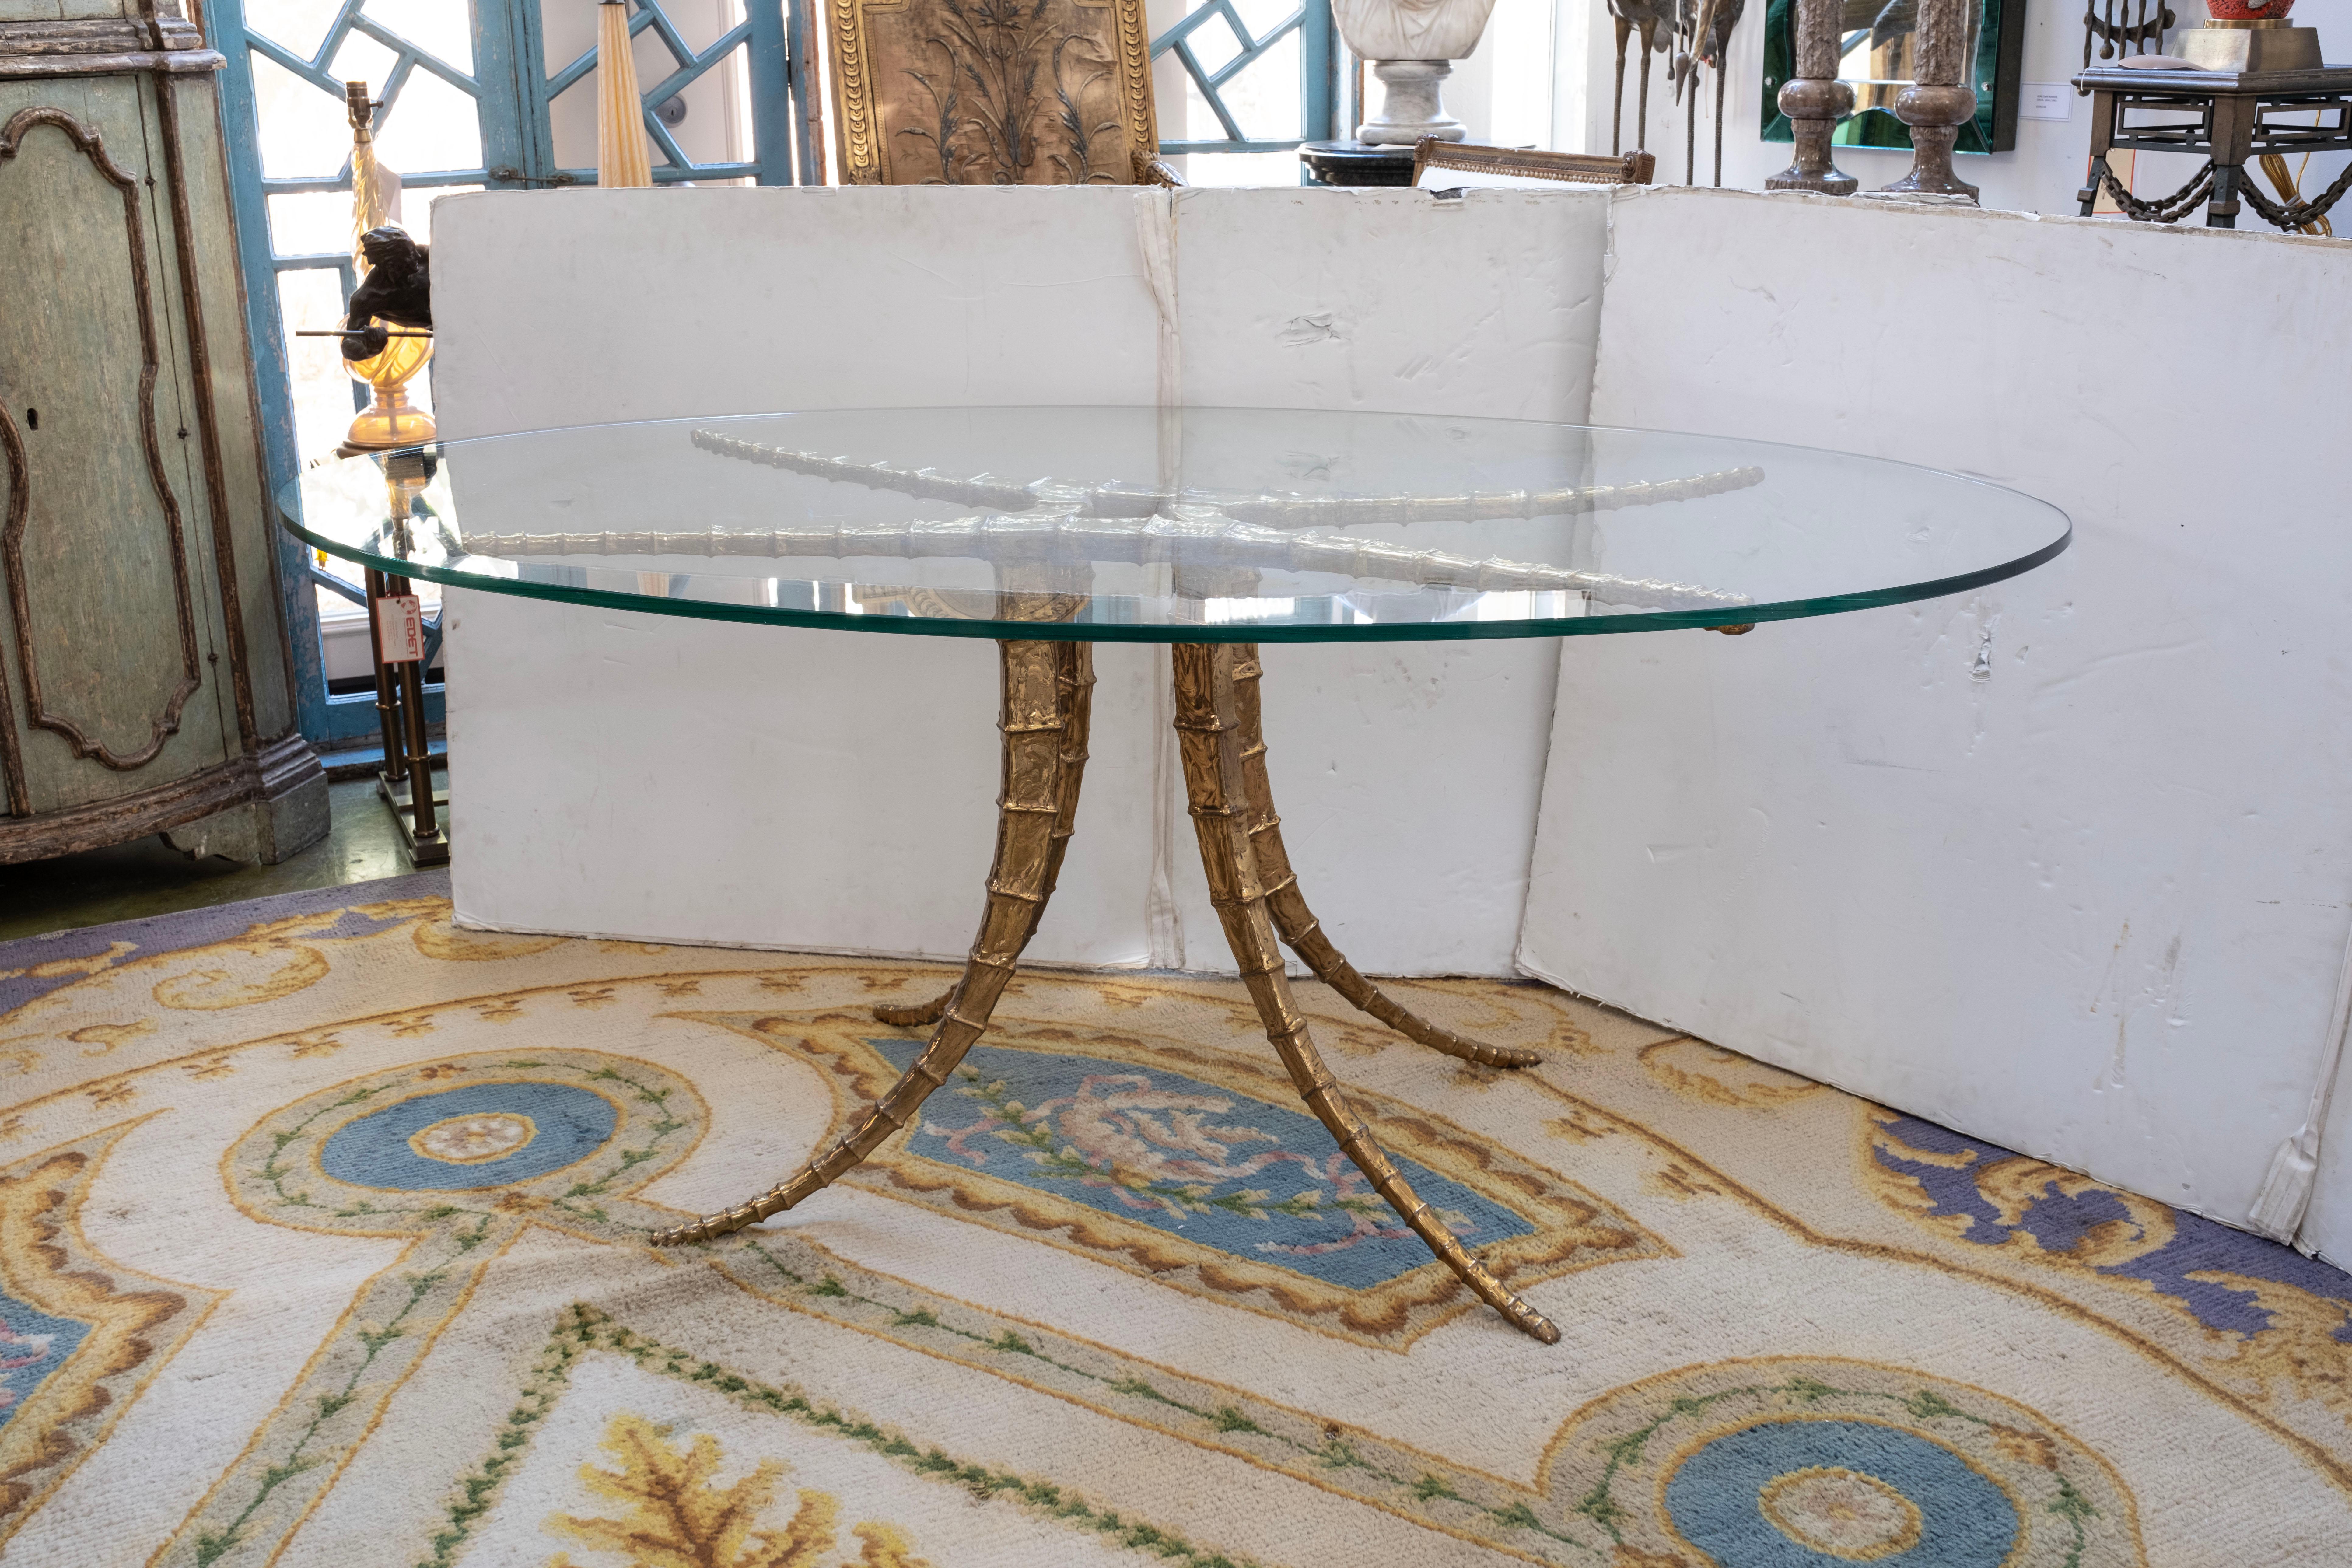 French brass horn dining table / center table signed by Alain Chervet.
This rare French brass horn table with an oval glass top is signed by Alain Chervet, 1981. Our versatile French Hollywood Regency table can be used as a dining table, center